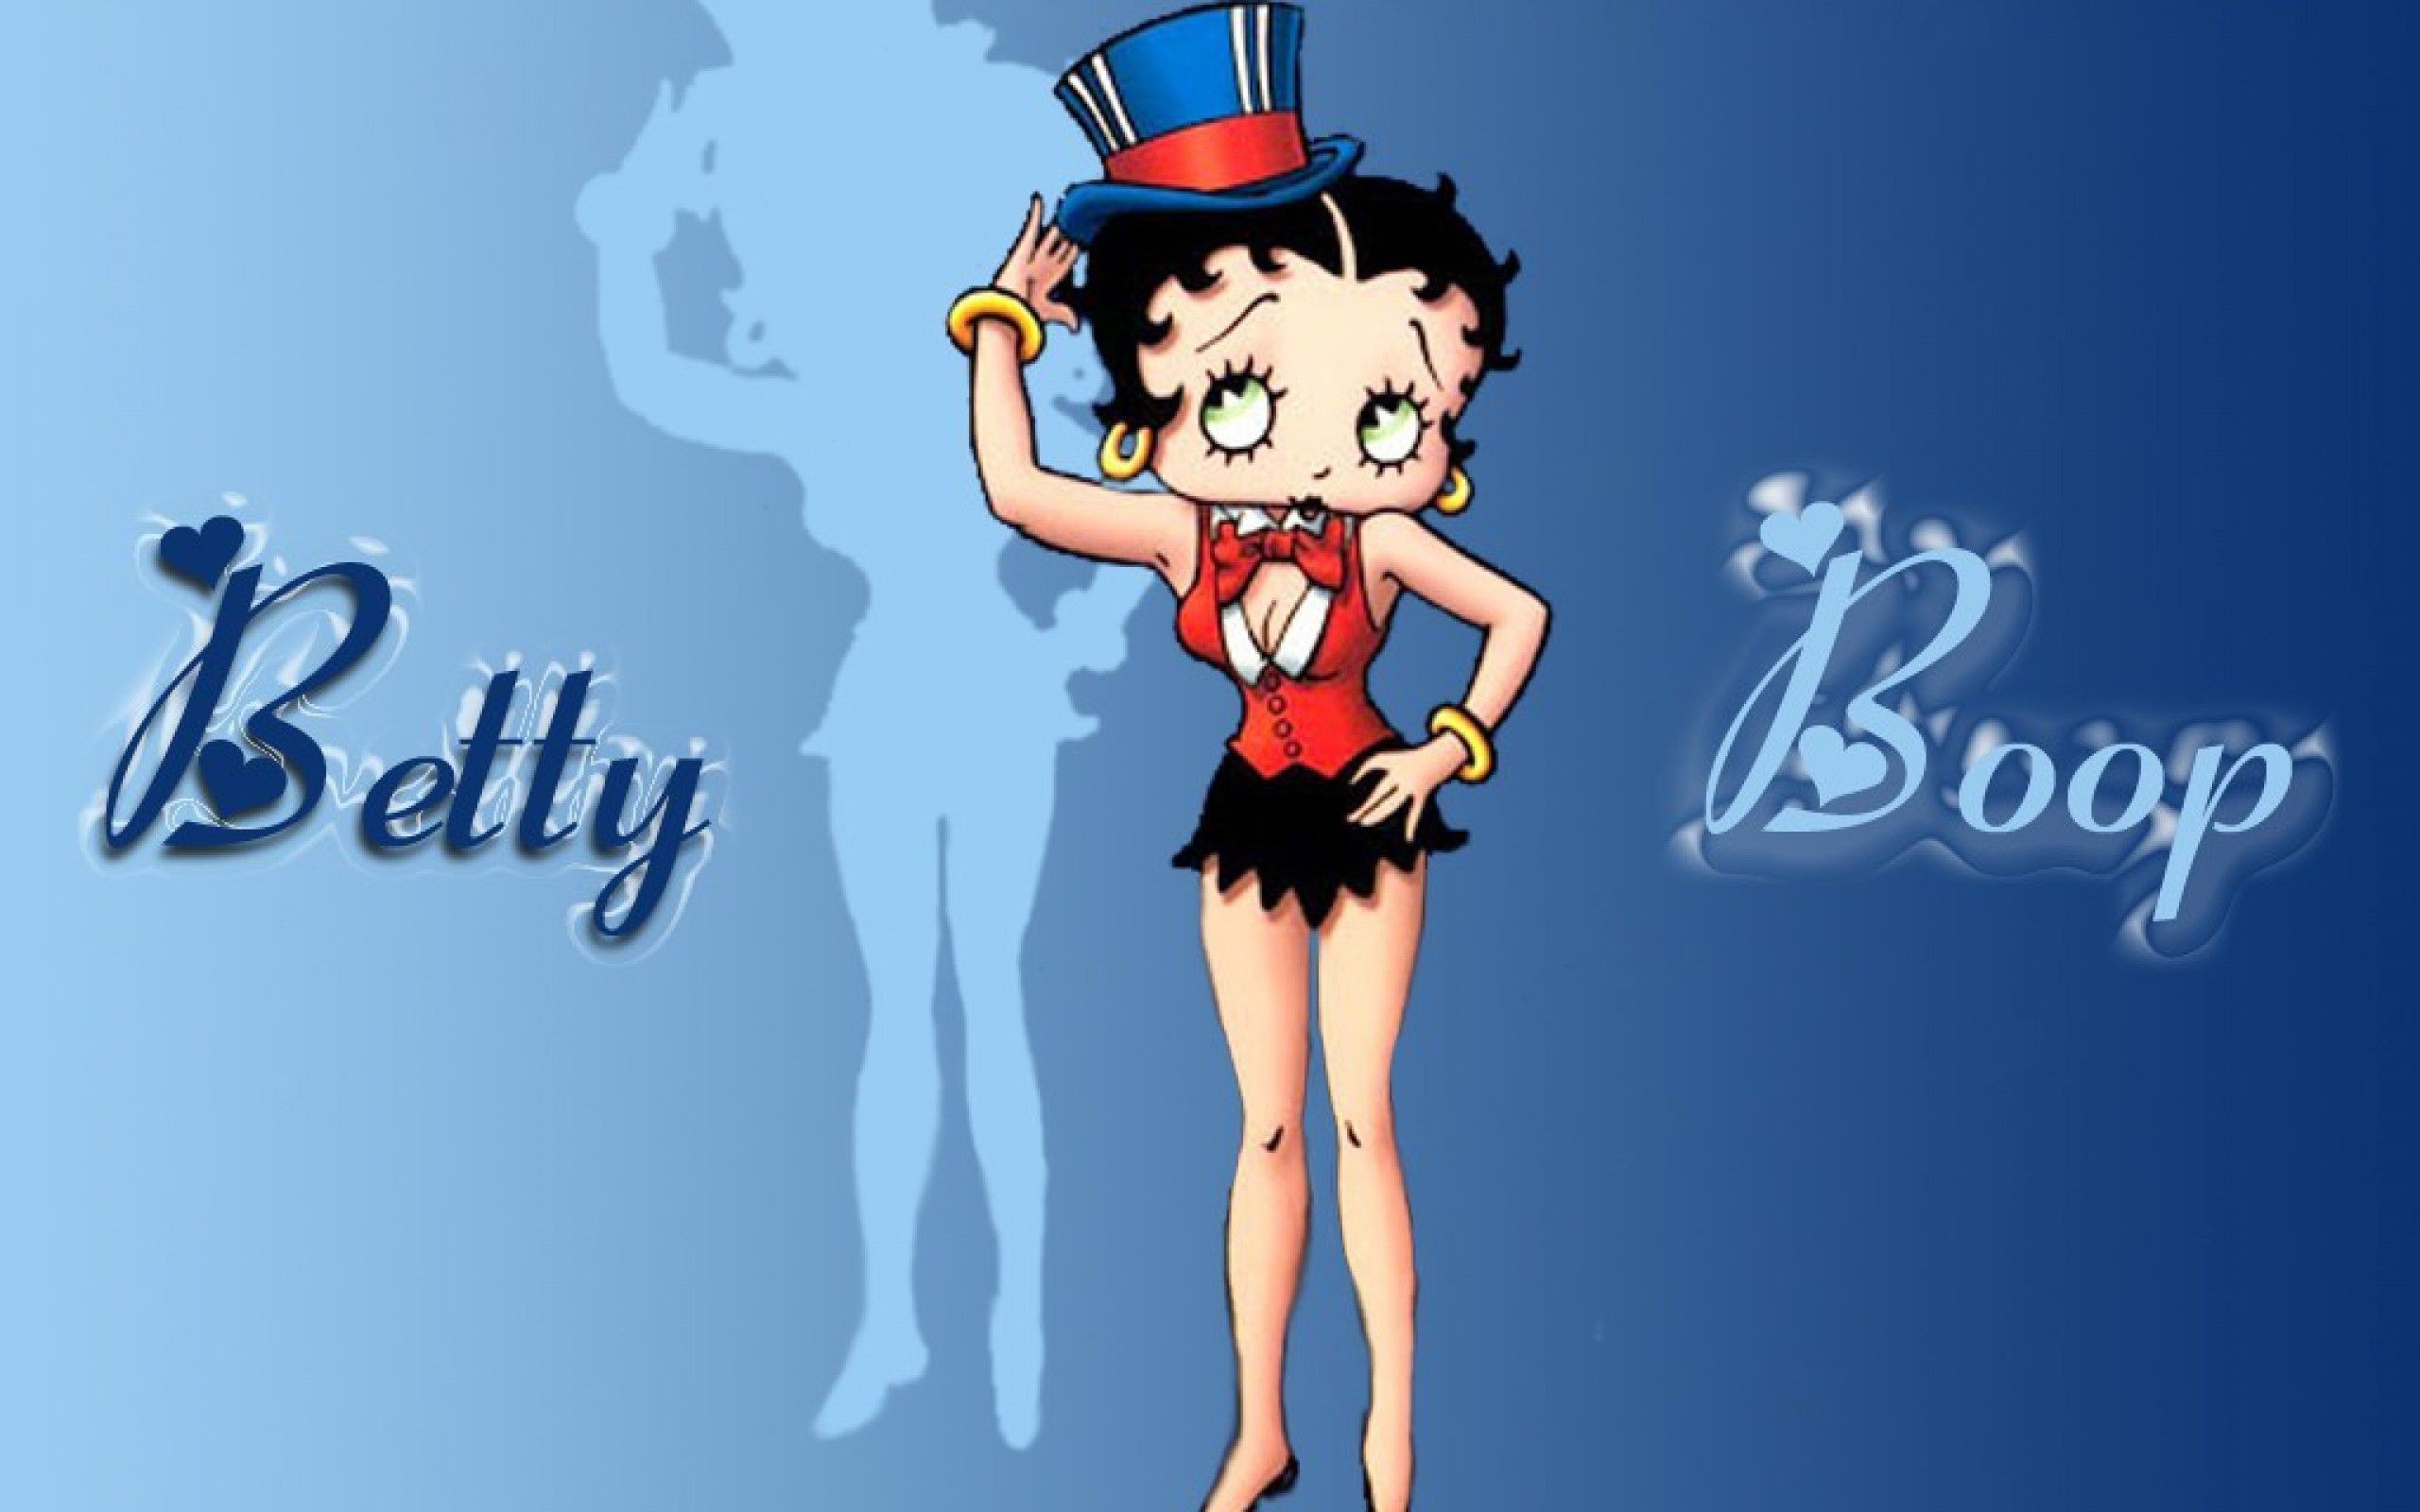 2560x1600 Betty Boop Wallpaper Collection For Free Download